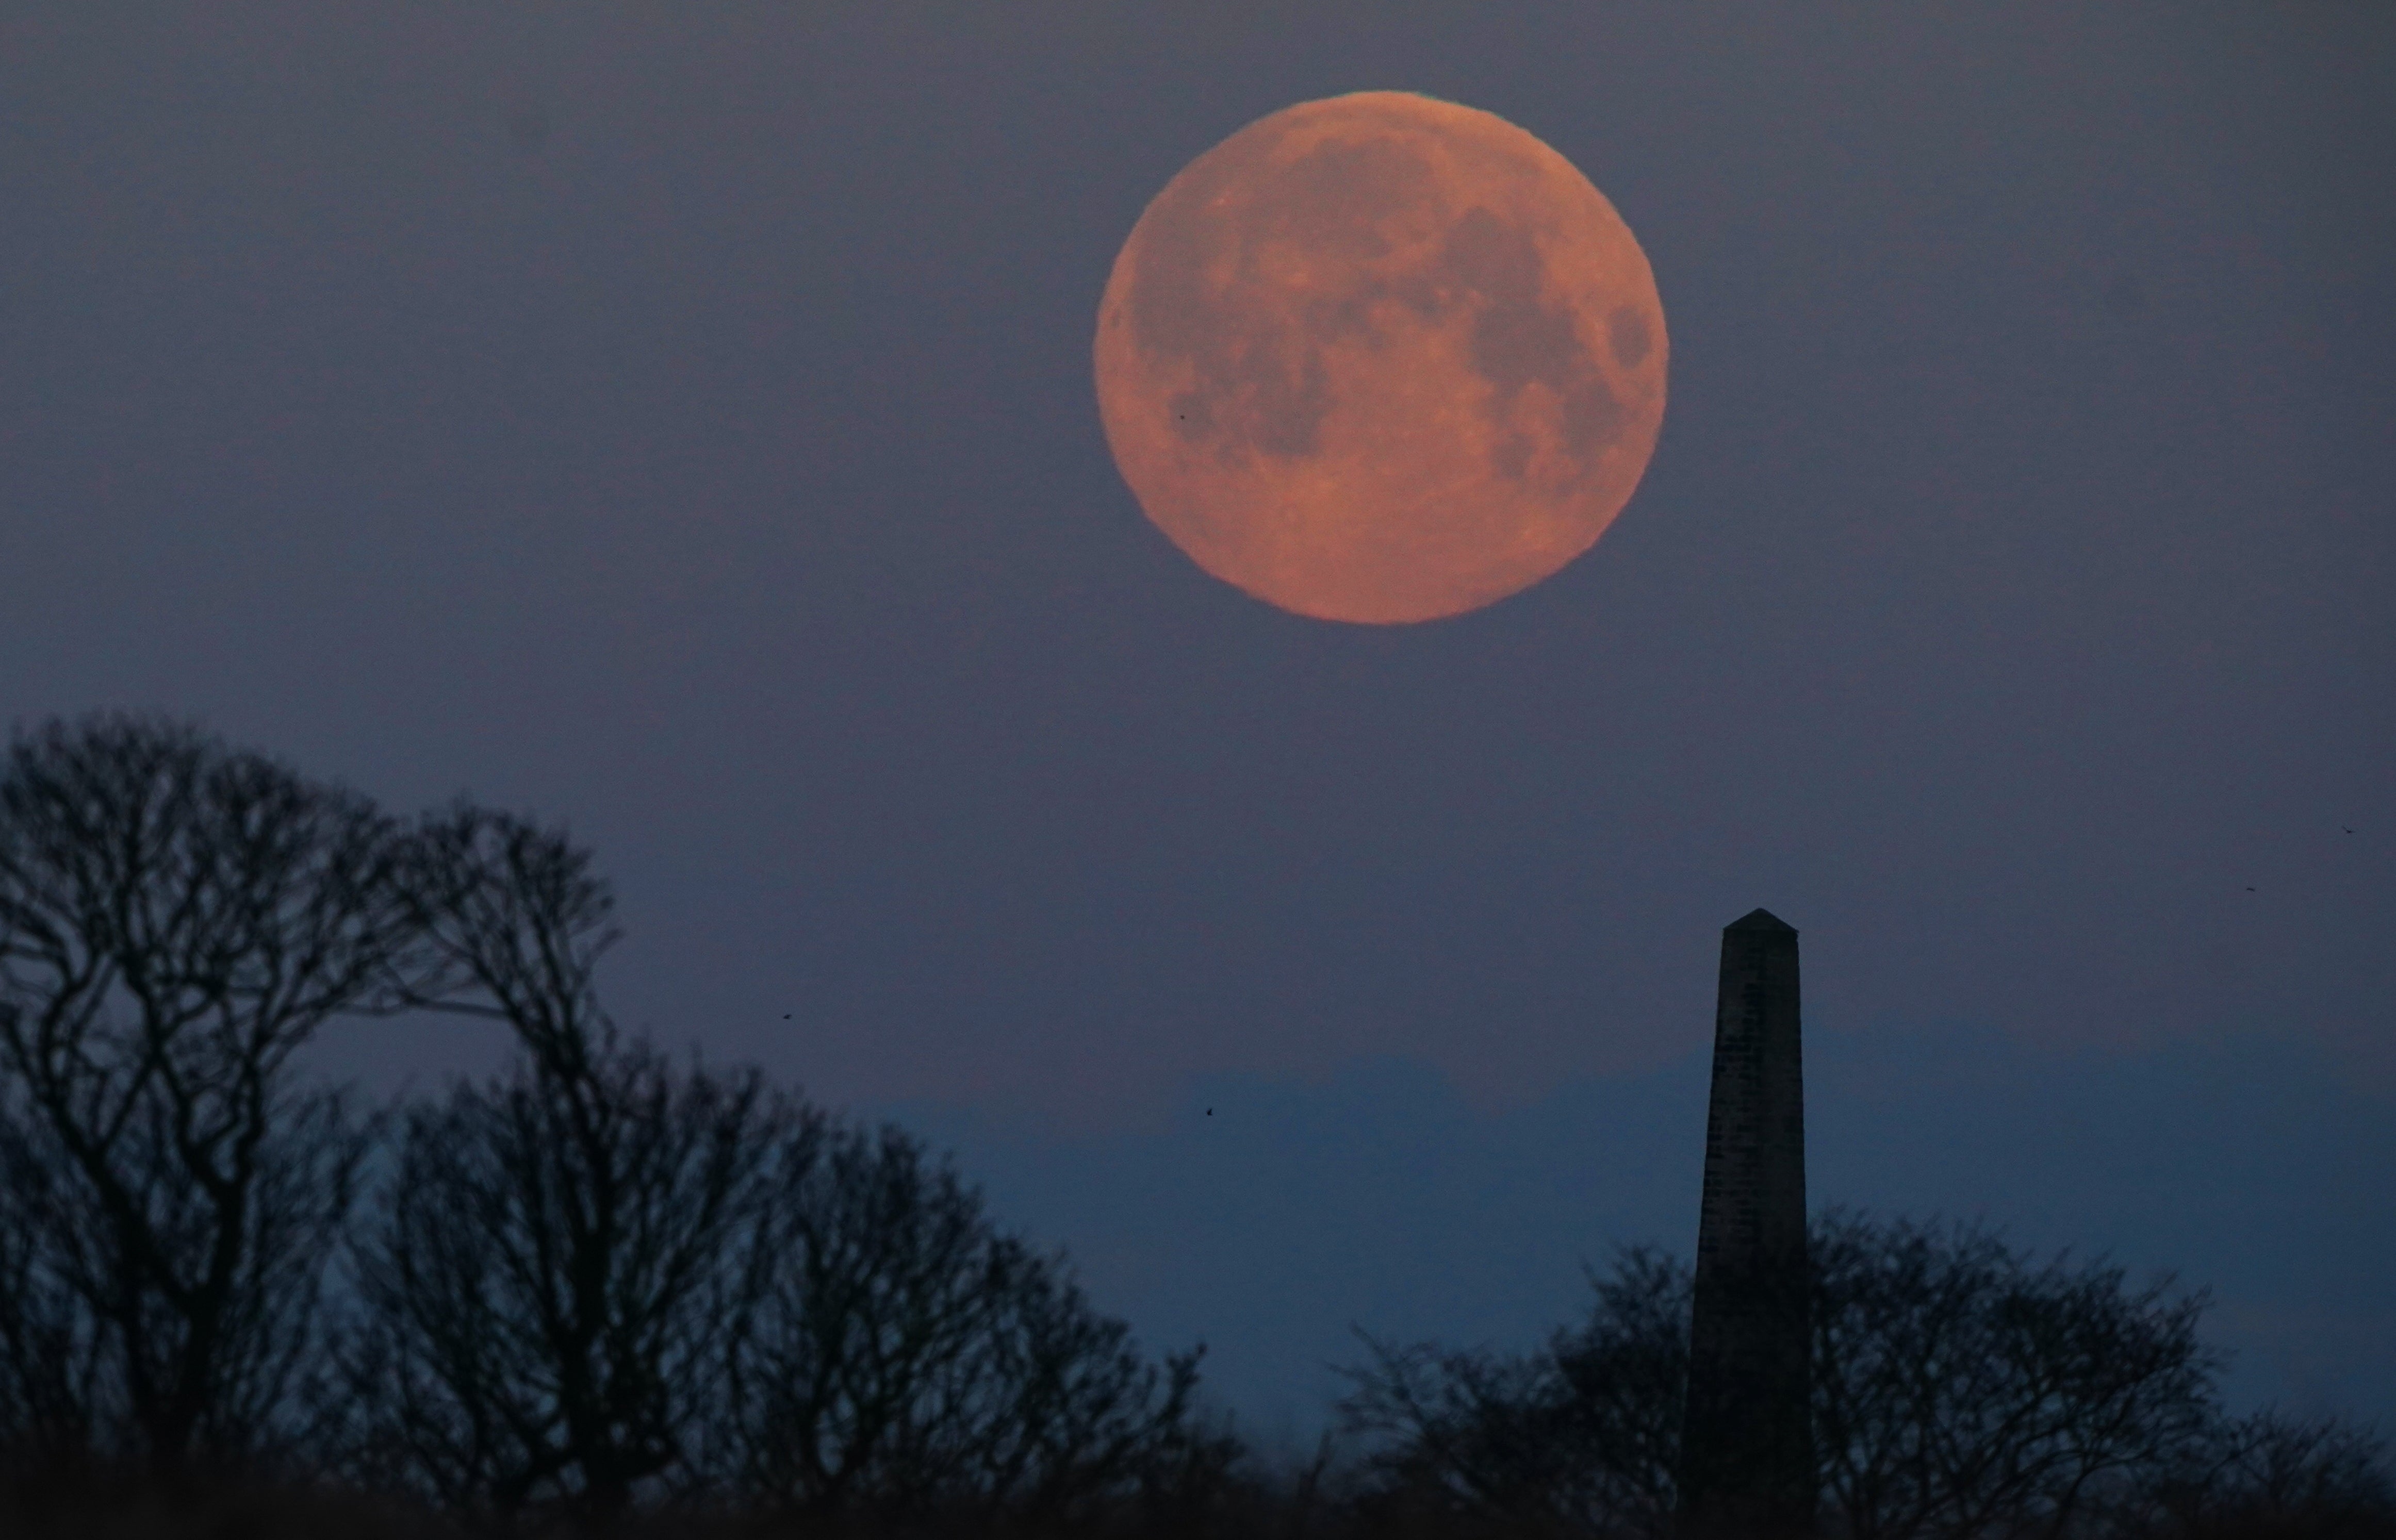 The full moon known as the 'Snow moon' sets over Whitley Bay in North Tyneside